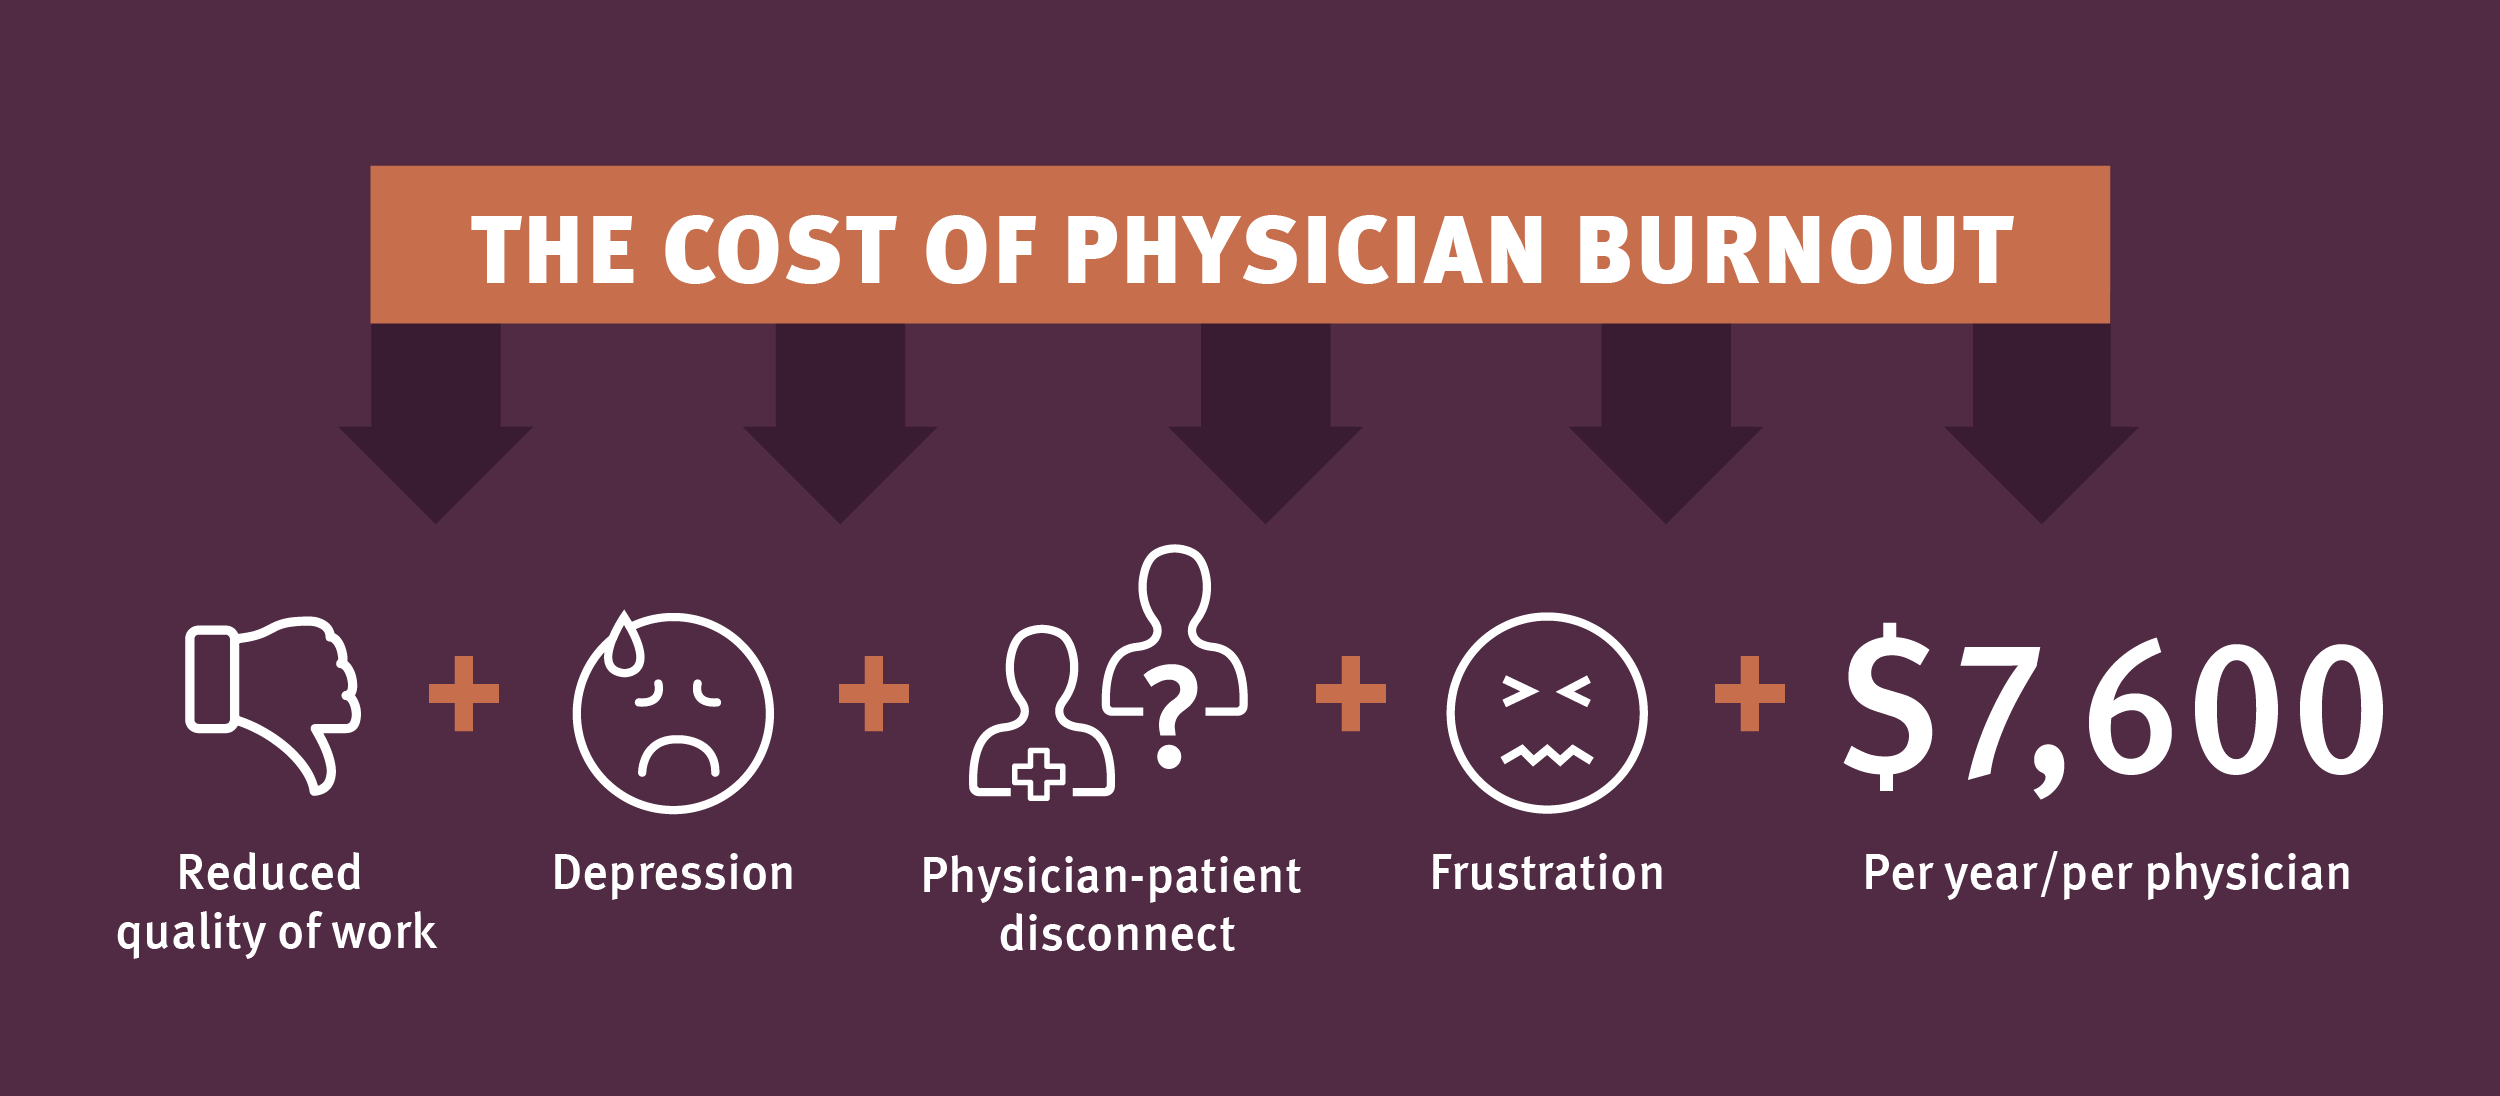 Cost of Physician Burnout